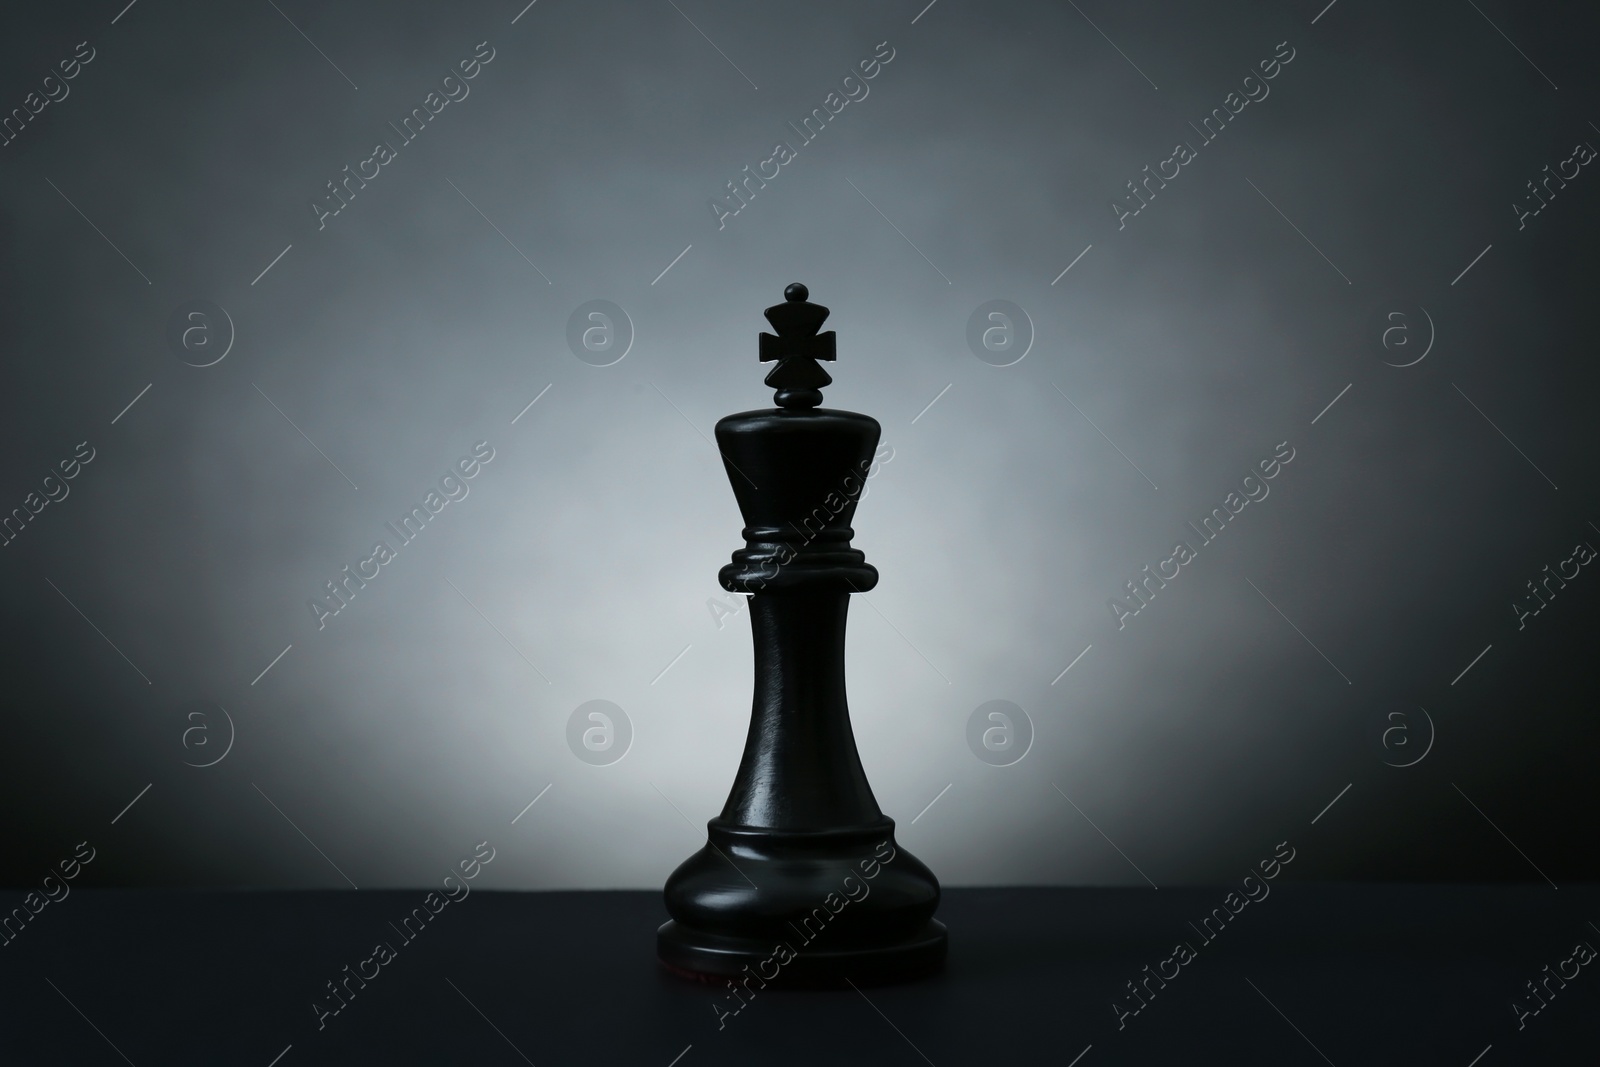 Photo of Black king on dark table against light background. Chess piece